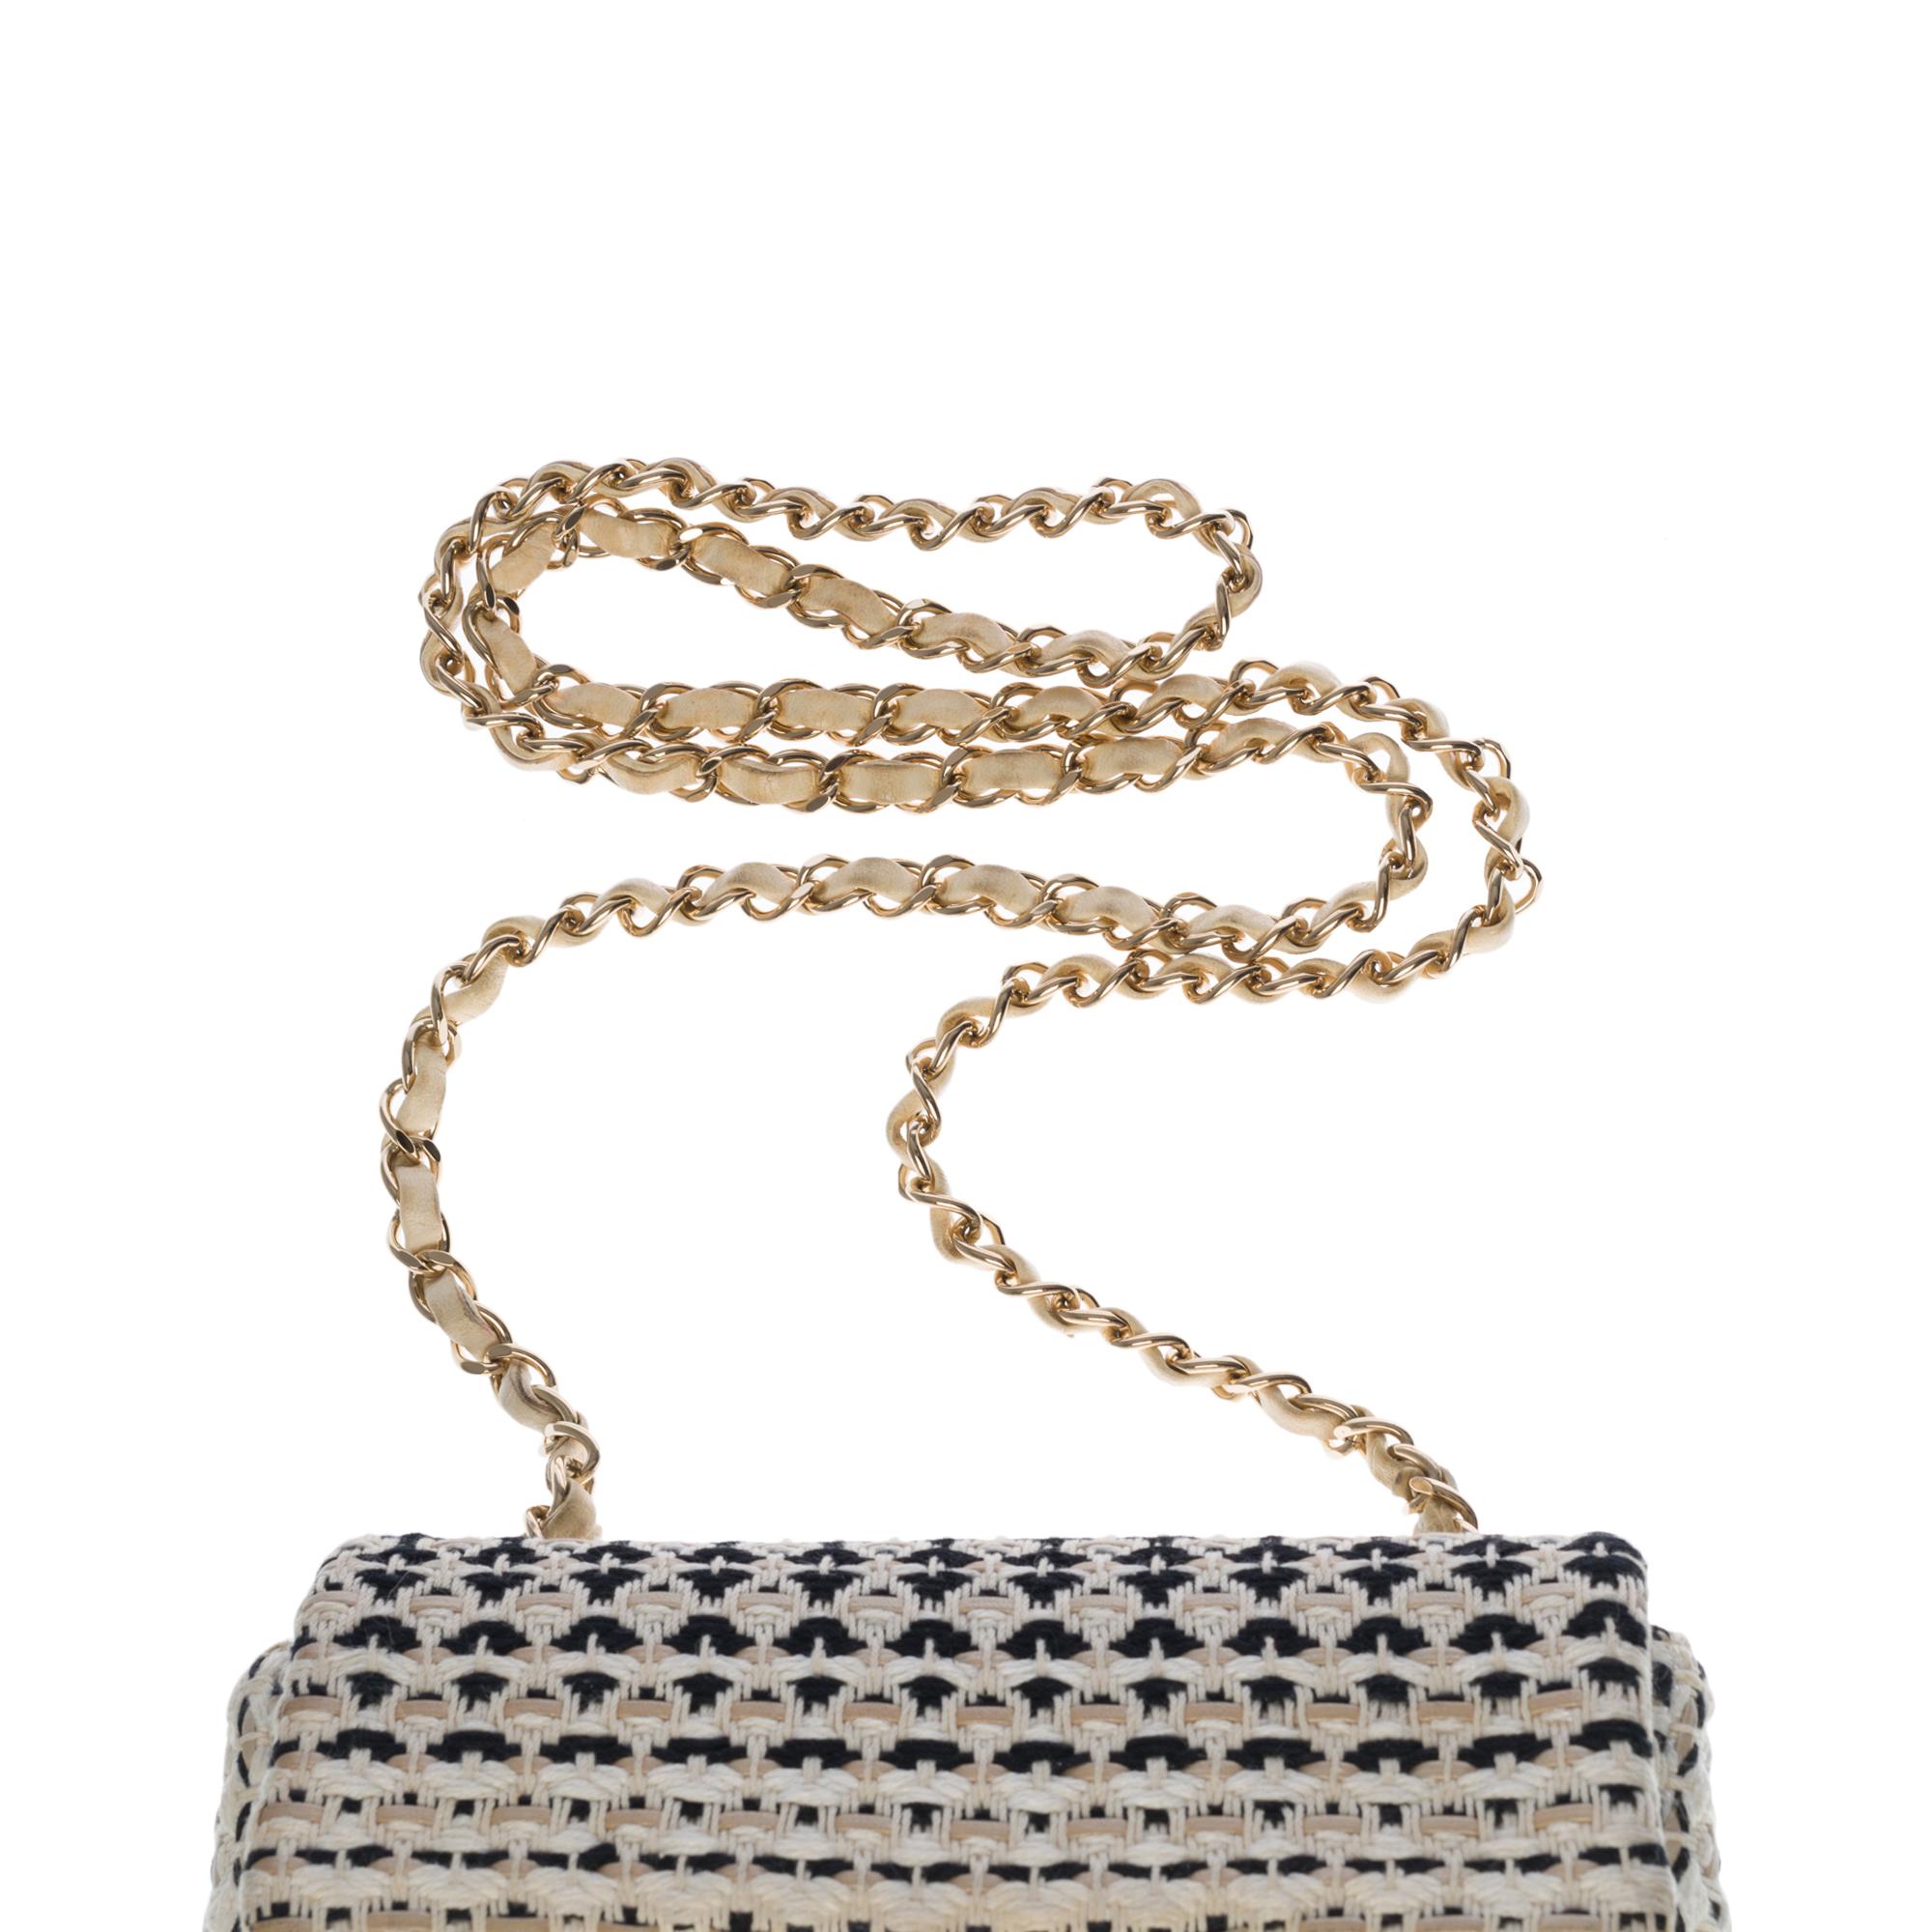 Limited Edition Chanel Mini Timeless Shoulder bag in White & Black Tweed, SHW 2